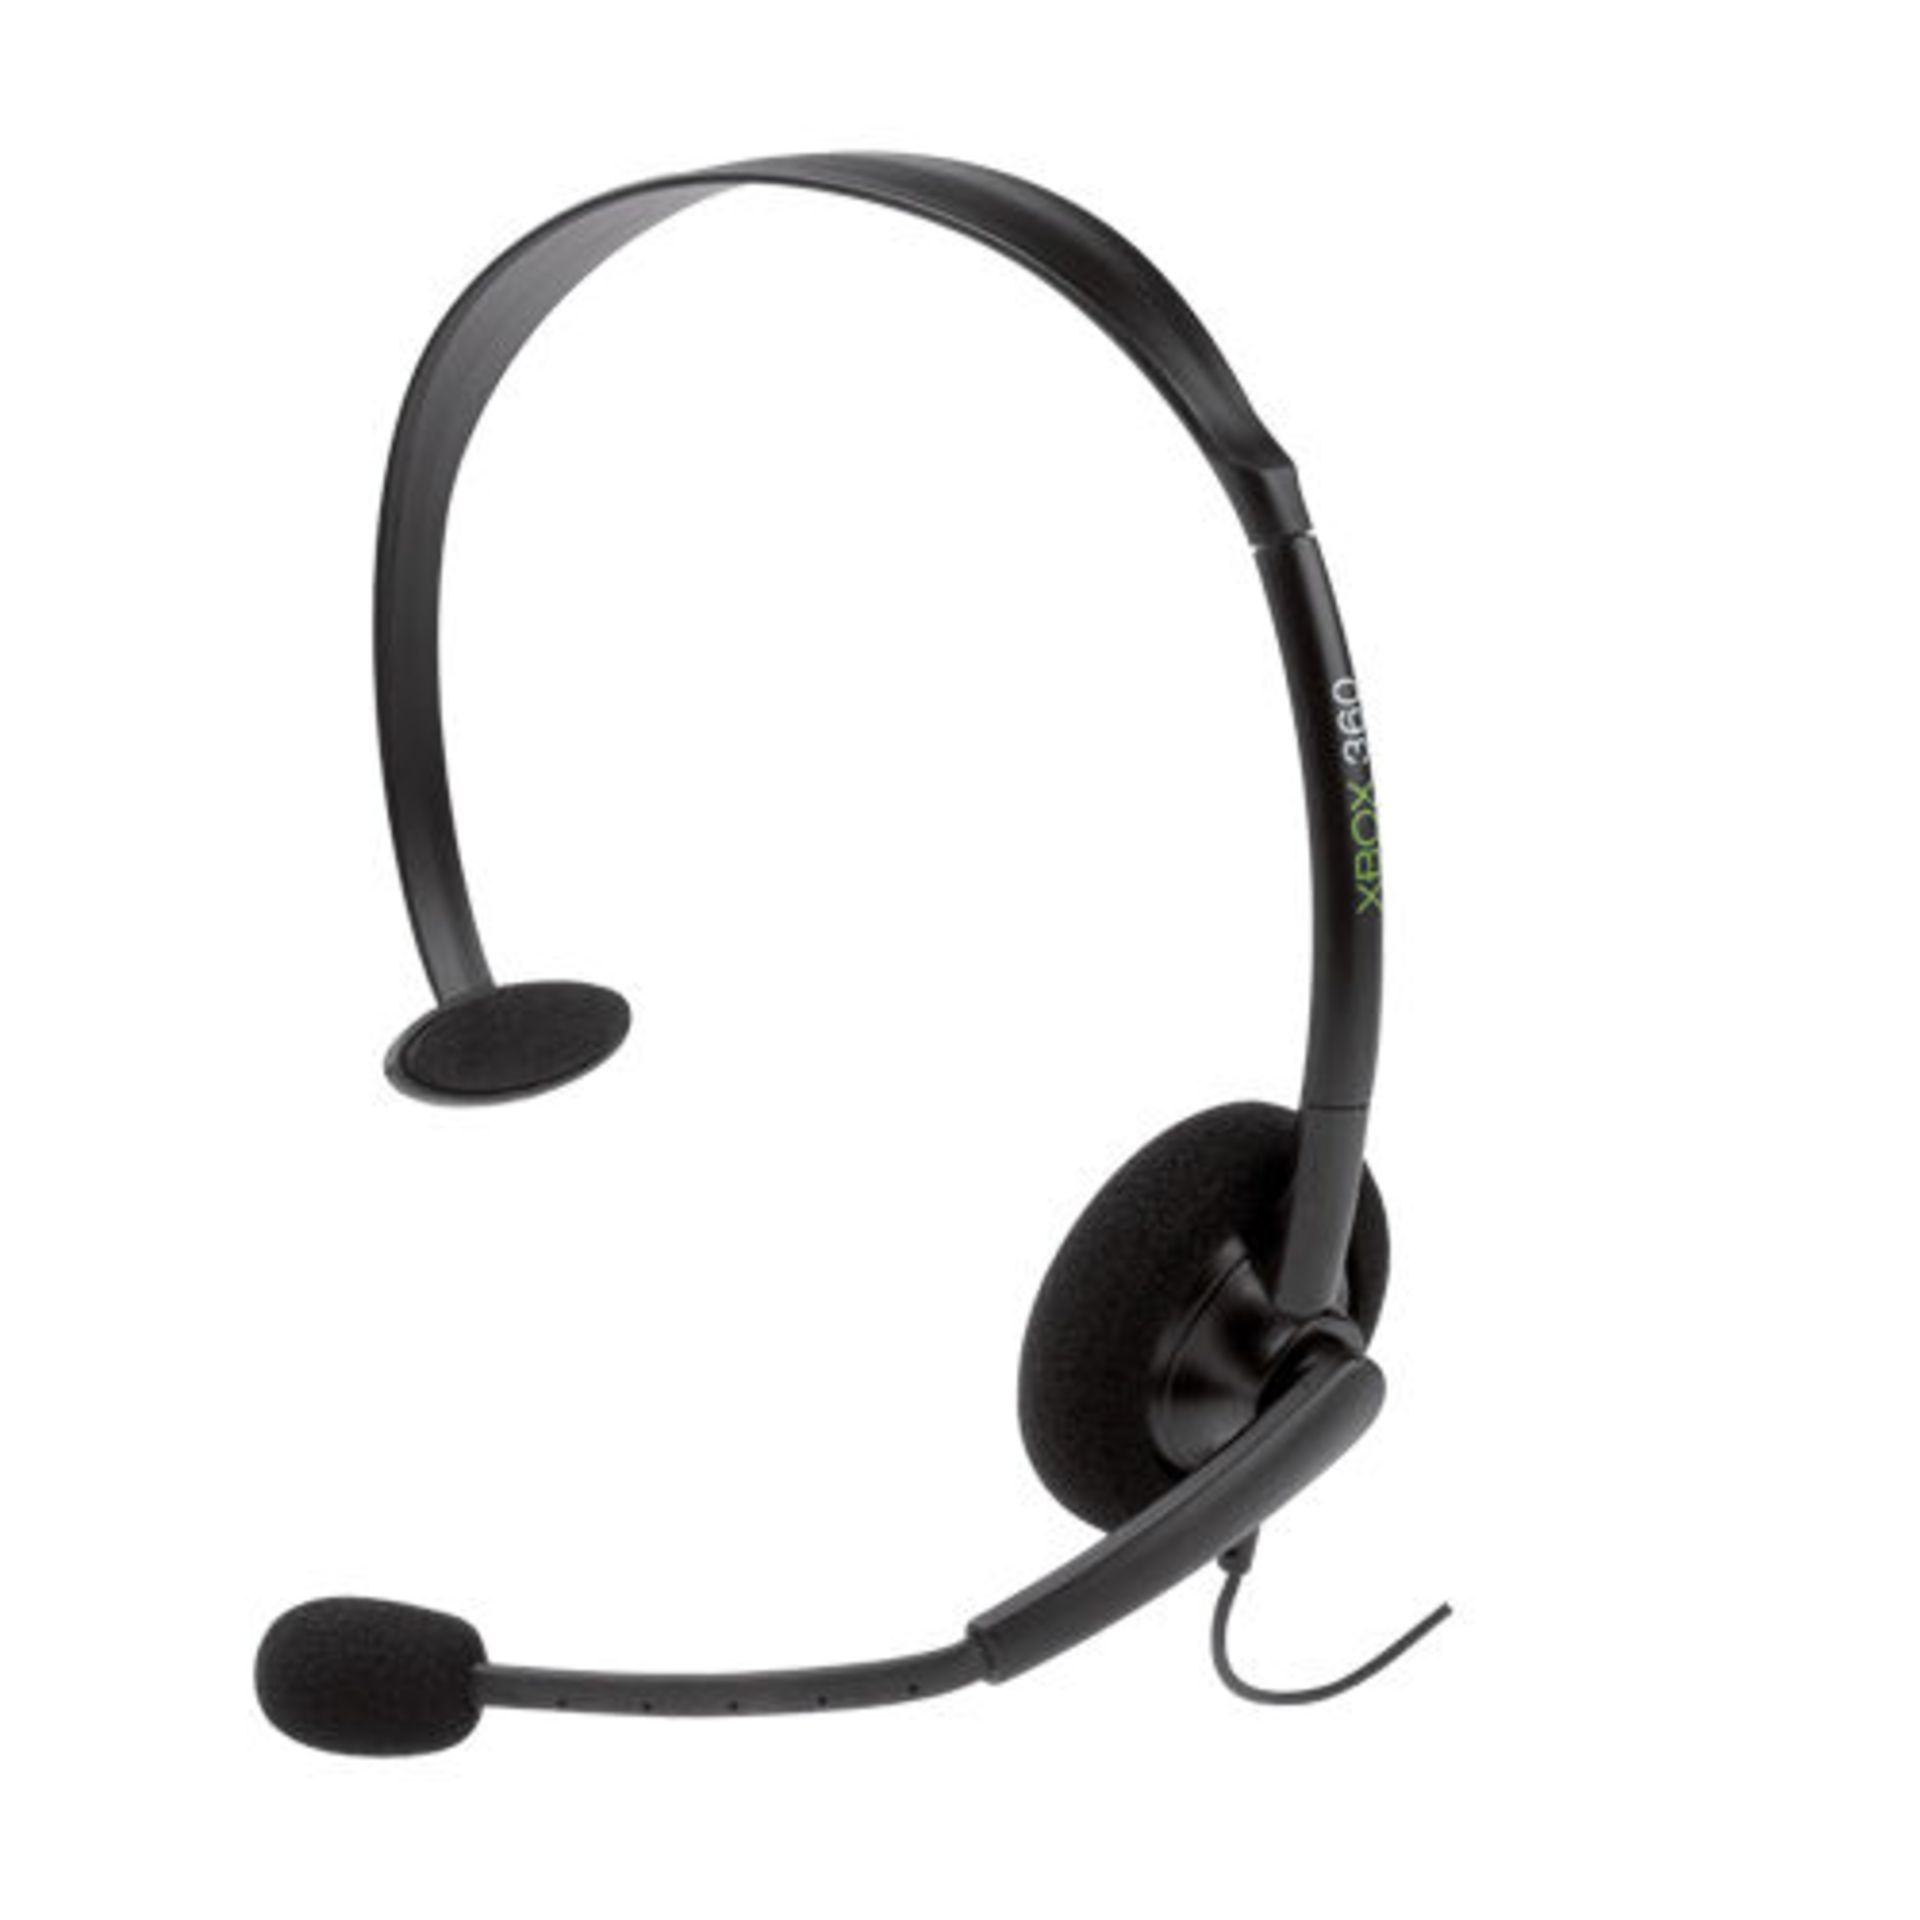 JOBLOT 50 X NEW OFFICIAL XBOX 360 LIVE ONLINE CHAT HEADSET WITH MIC GAMING HEADPHONES 2.5MM AUX - Image 5 of 5